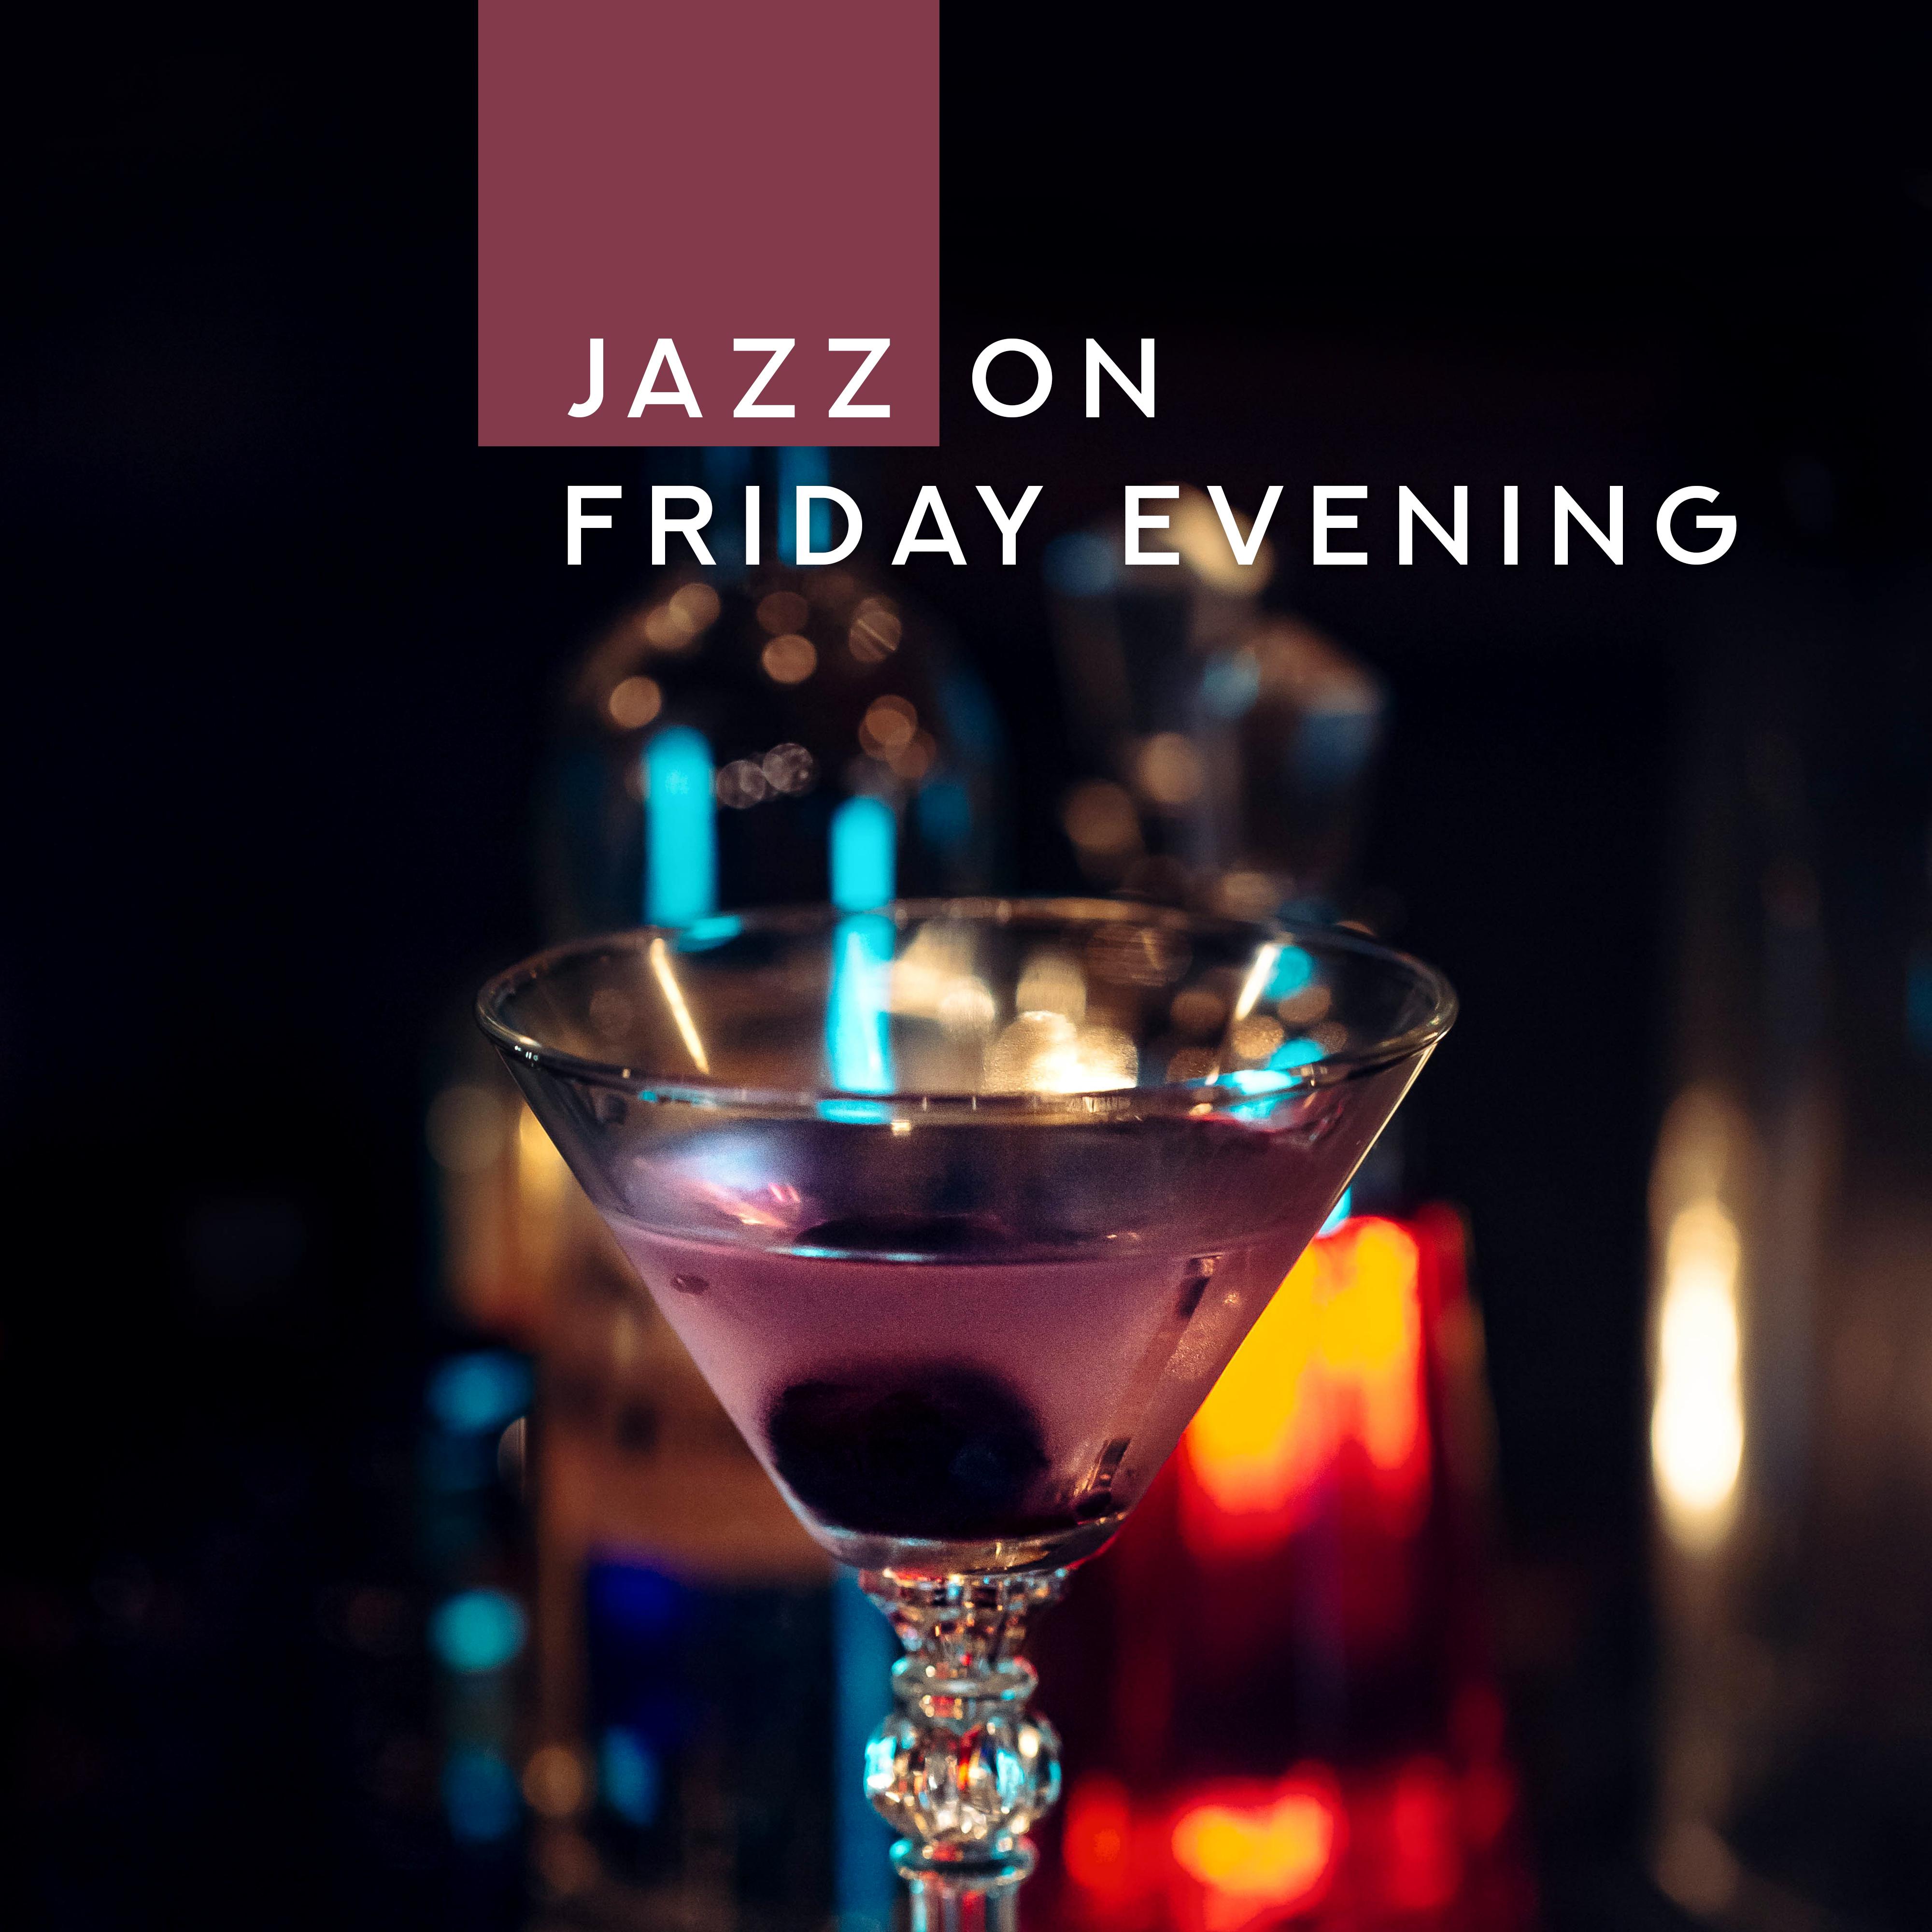 Jazz on Friday Evening - Restful Jazz Melodies after a Hard Week Full of Challenges, Work and Duties, Music to Relax, Unwind and Calm Down